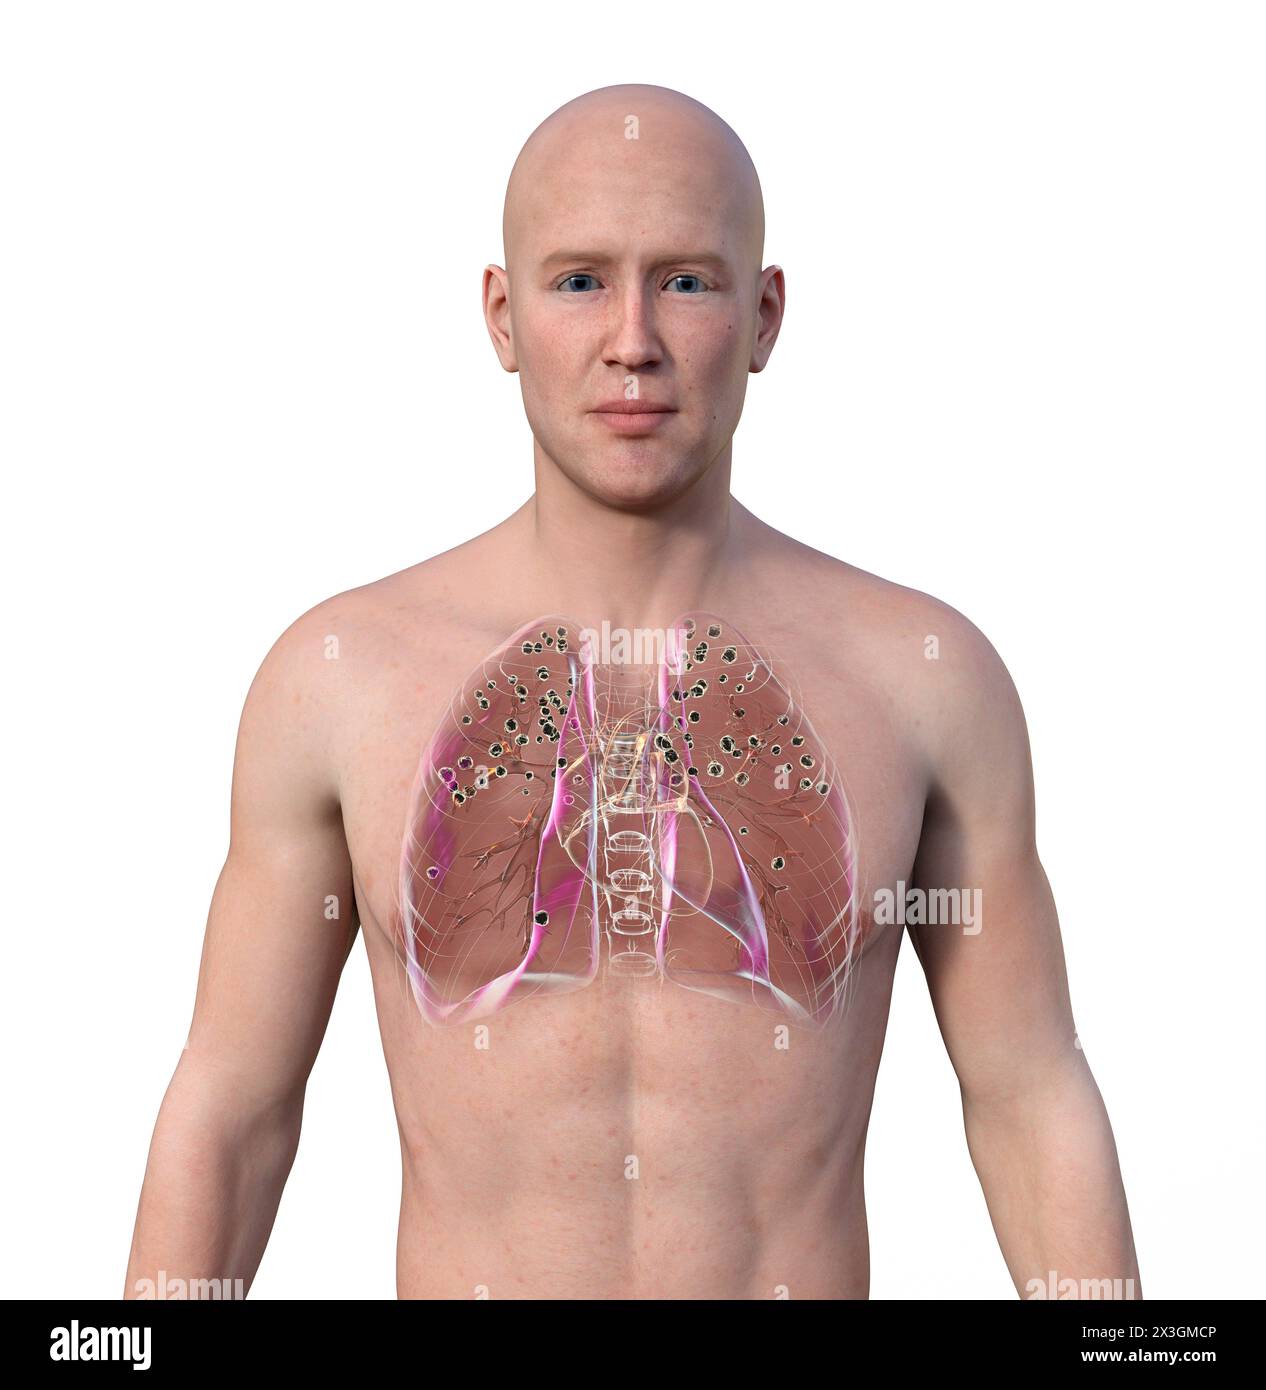 Illustration of a man with silicosis nodules in the lungs, emphasising the impact of silica exposure. Stock Photo